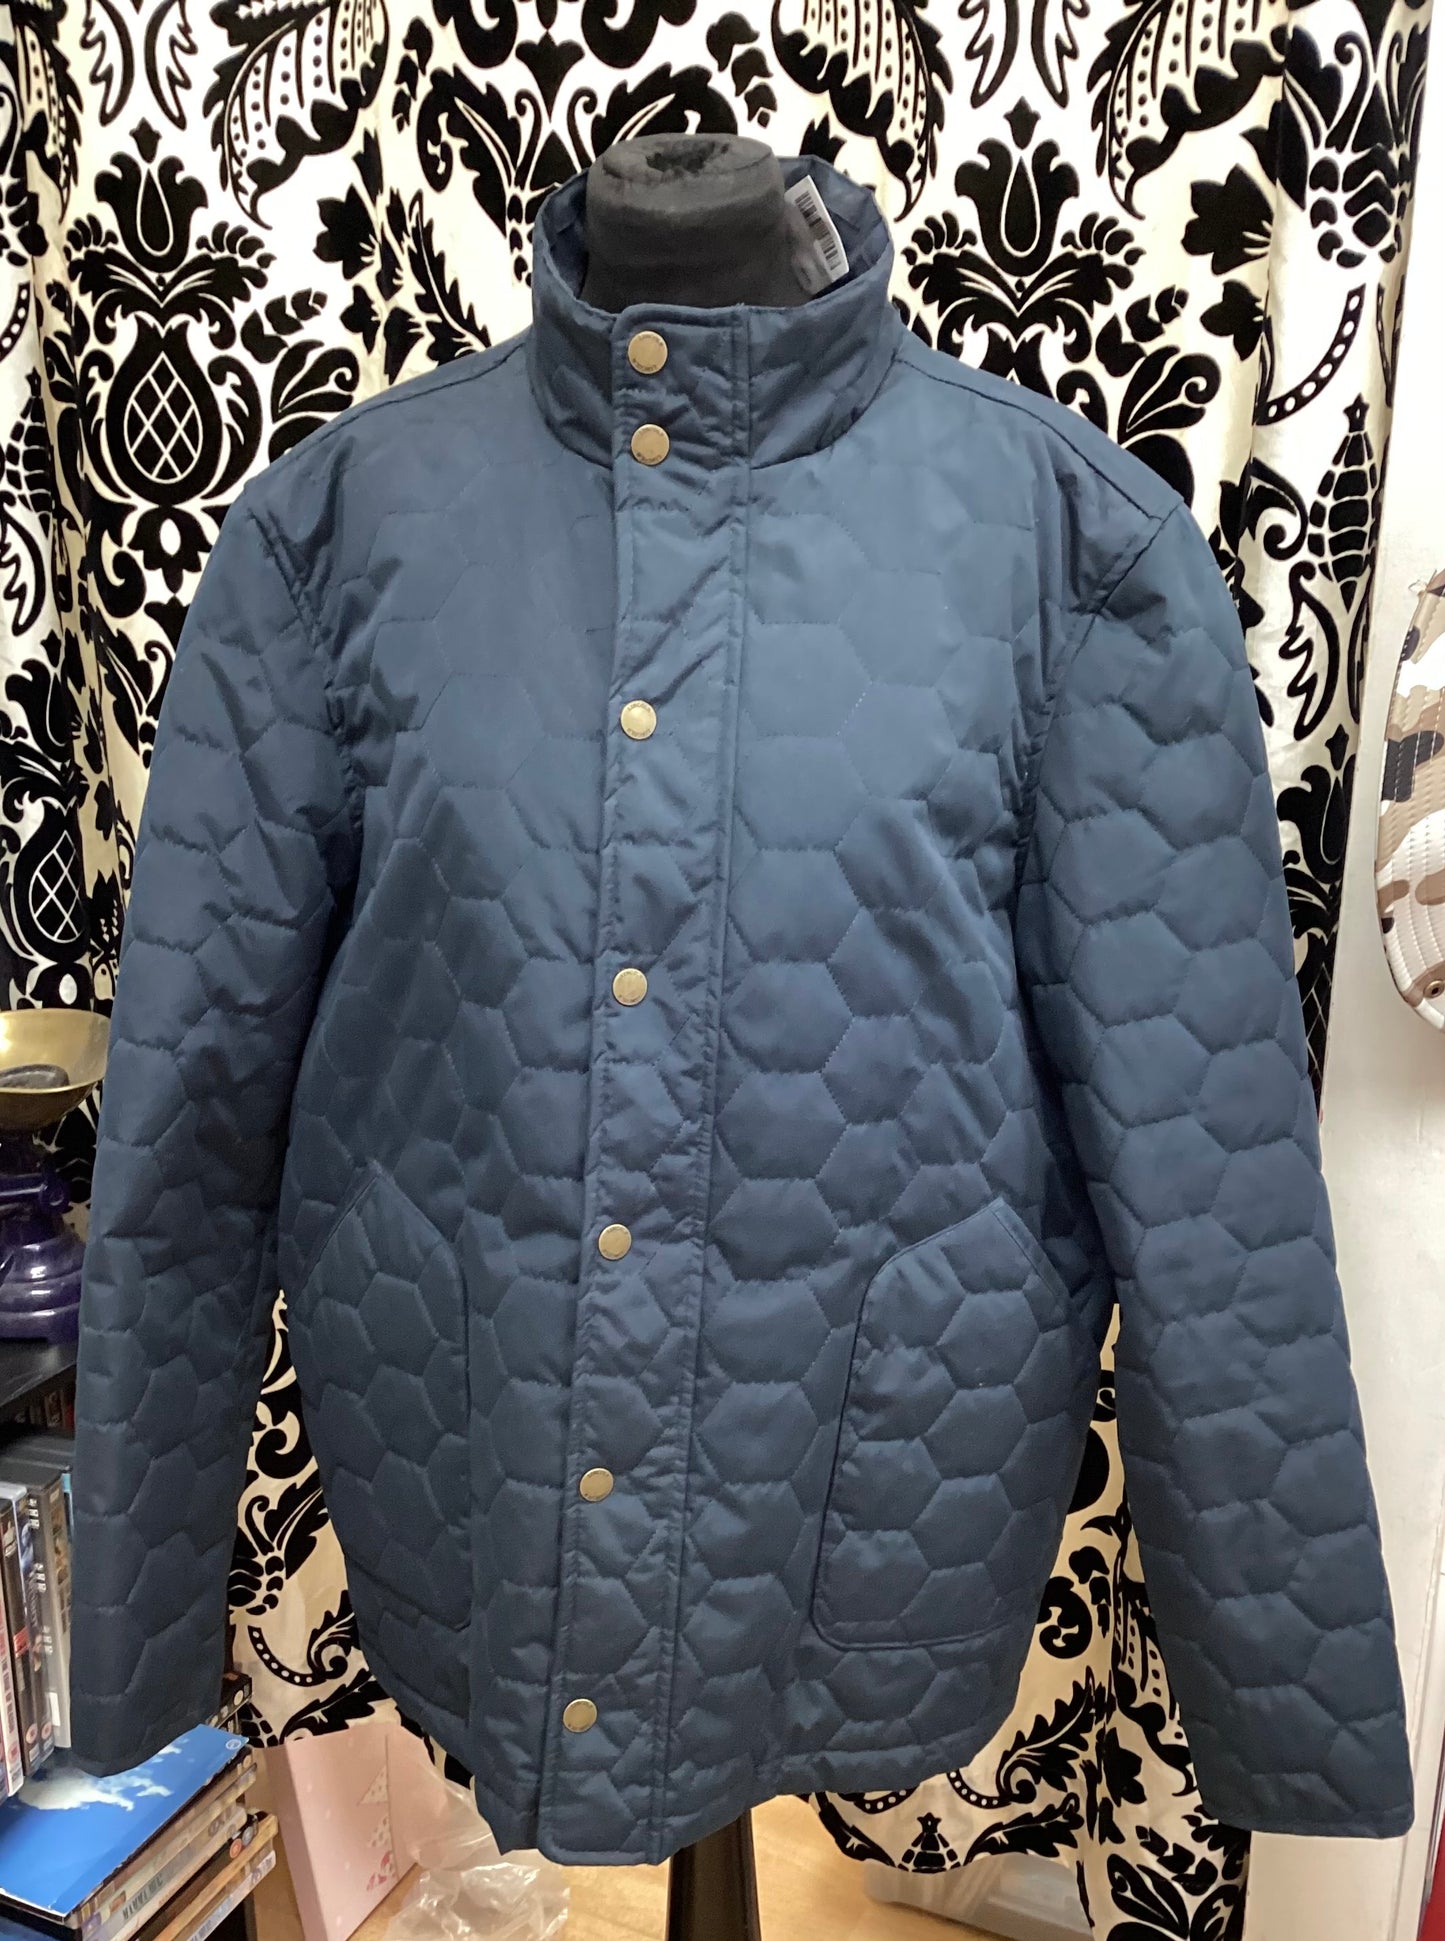 Lincoln Large Men’s Quilted Navy Blue Coat